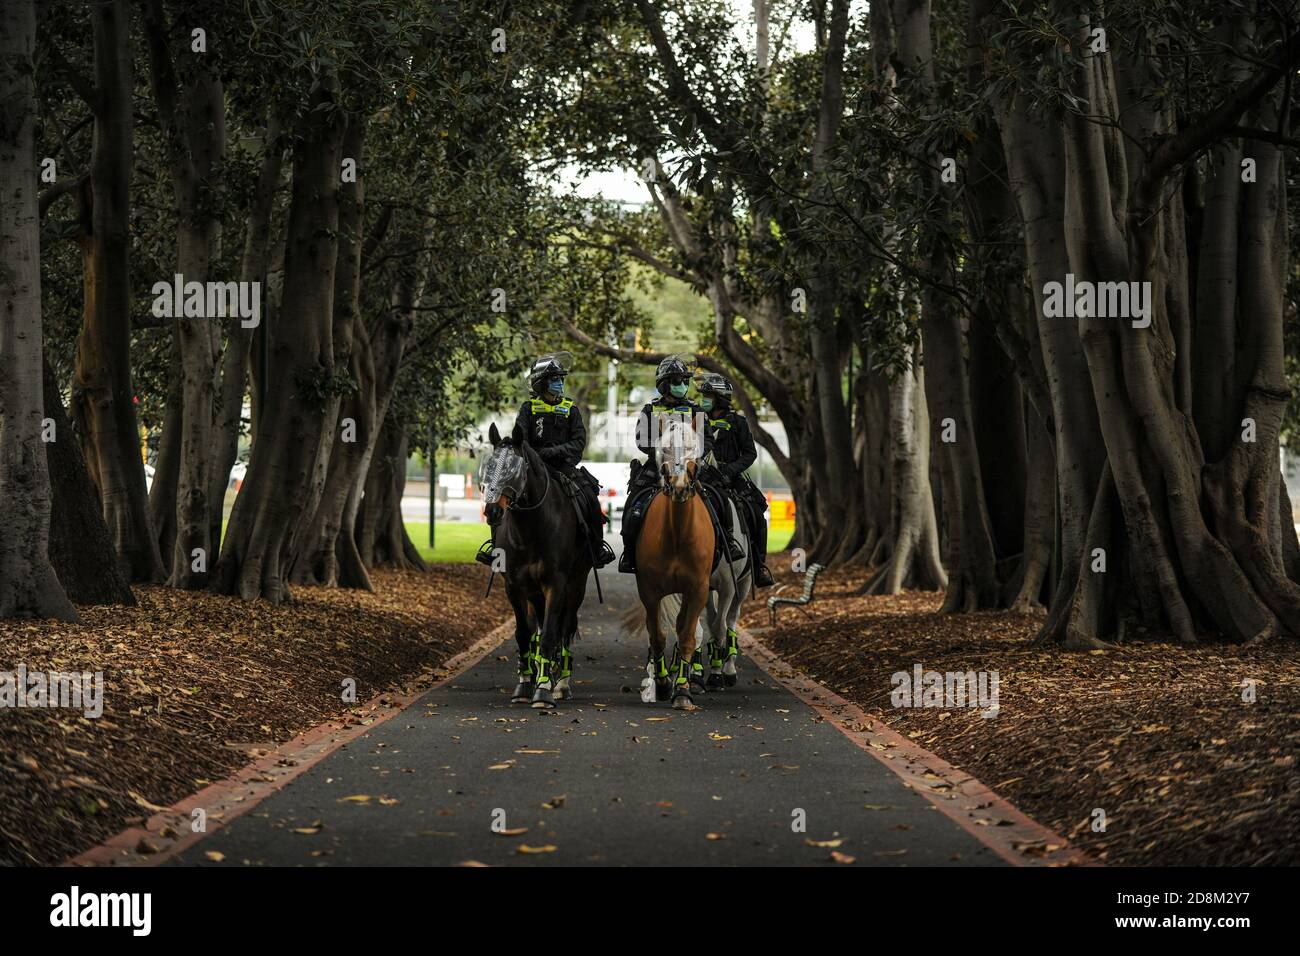 Melbourne, Australia 31 Oct 2020, Mounted Police Officers ride up a path between rows of trees in Treasury Gardens in preparation for a major police action to control an anti-government protest planned for the park. Credit: Michael Currie/Alamy Live News Stock Photo